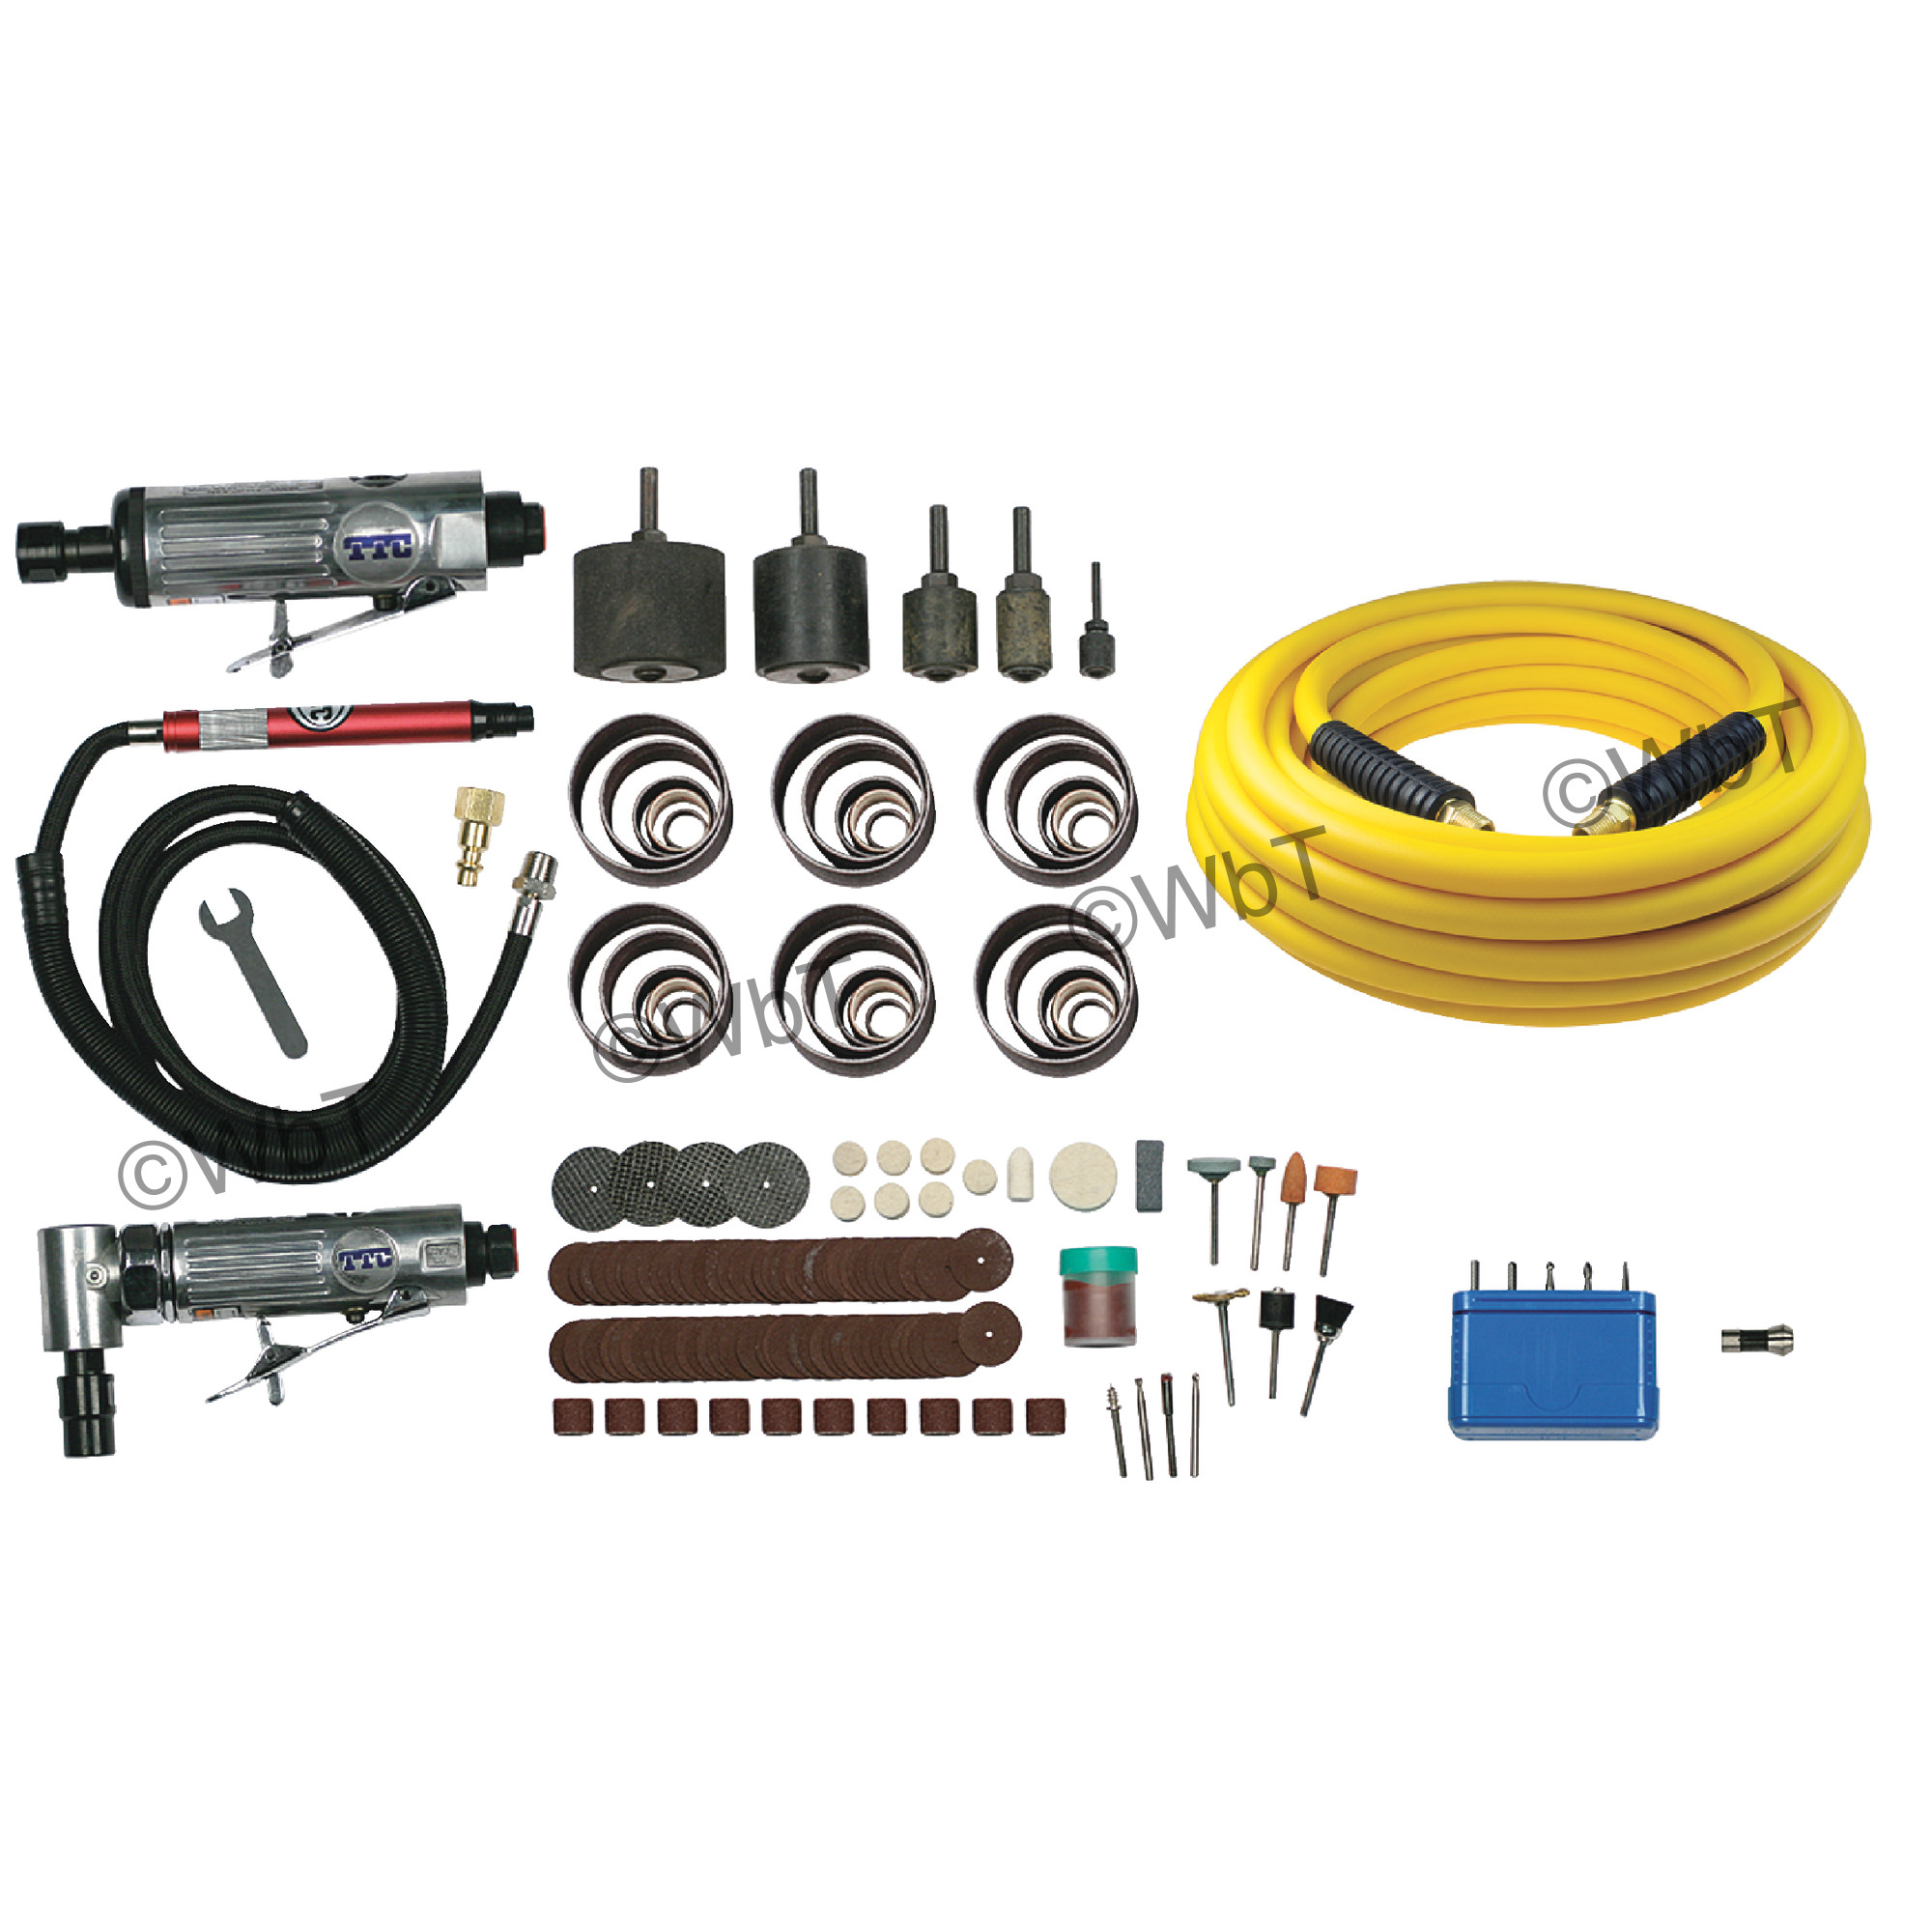 Complete Air Tool Kit